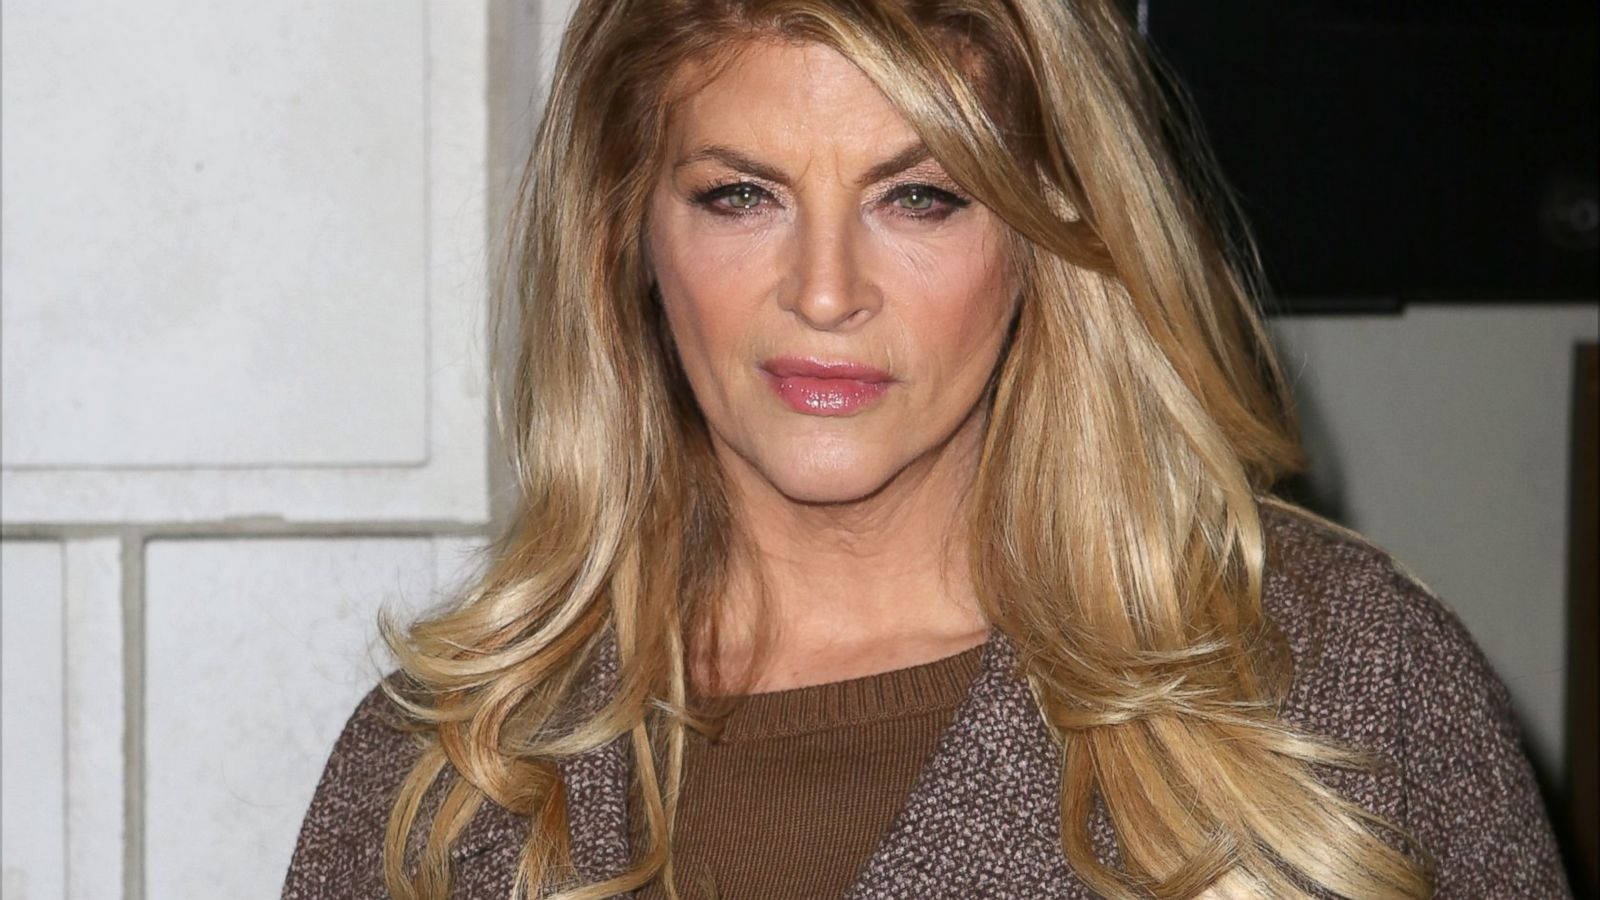 American Actress Kirstie Alley with a Serious Expression Wallpaper